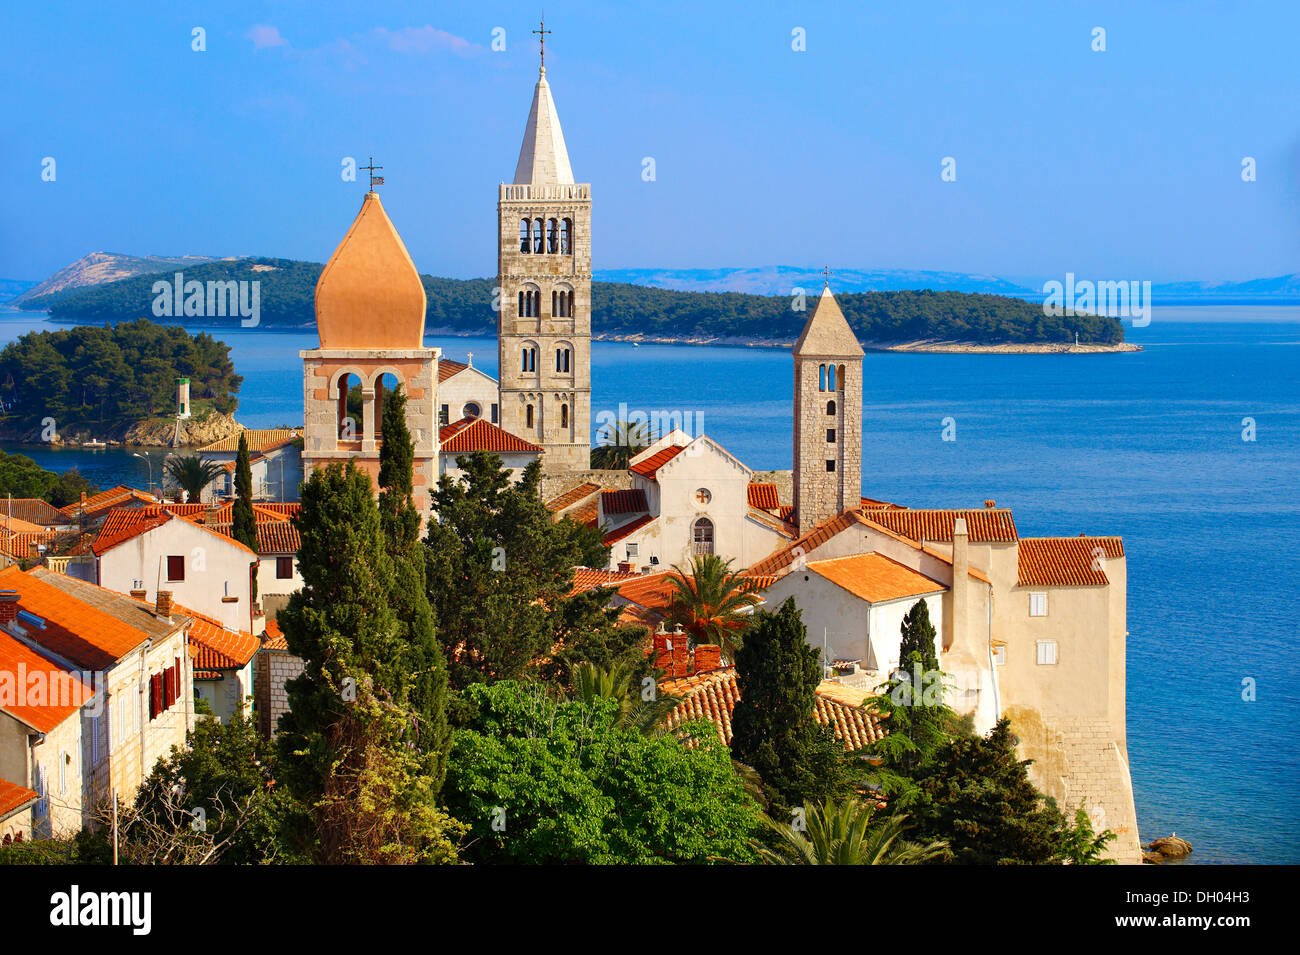 View from St John Church tower over the medieval roof tops of Rab town, Rab Island, Croatia, Europe Stock Photo